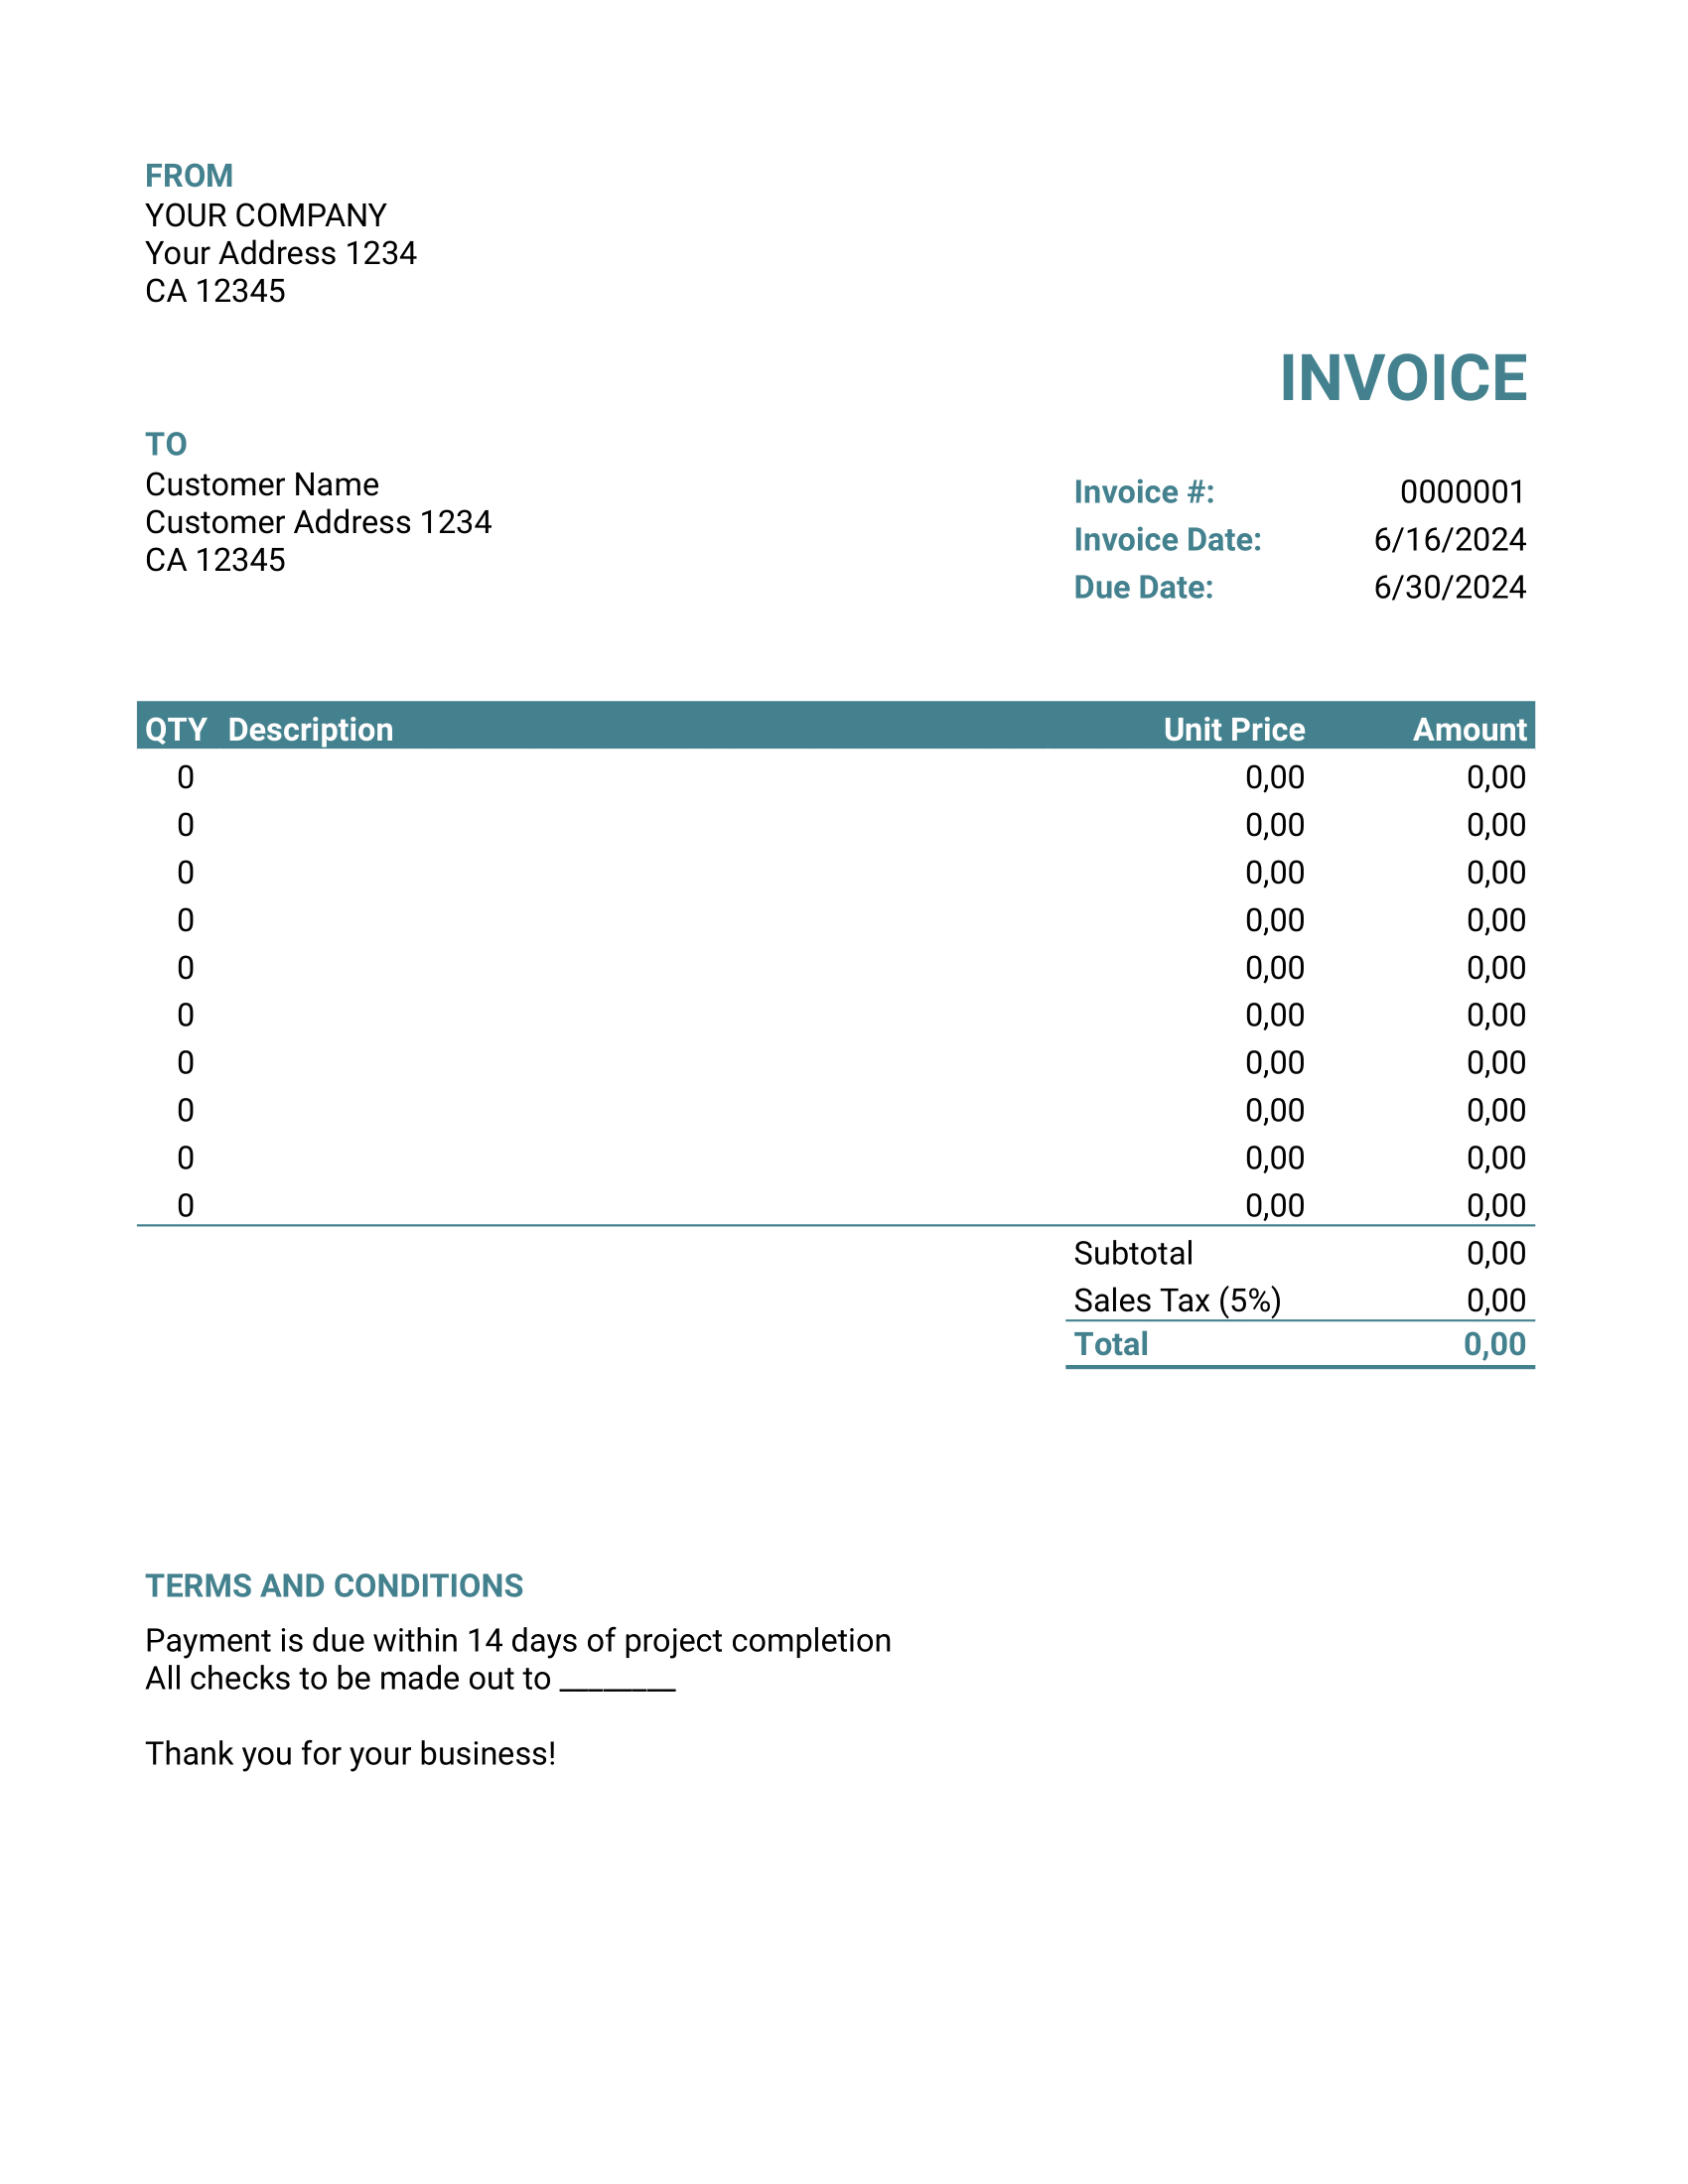 Blank Google Sheets Invoice Template